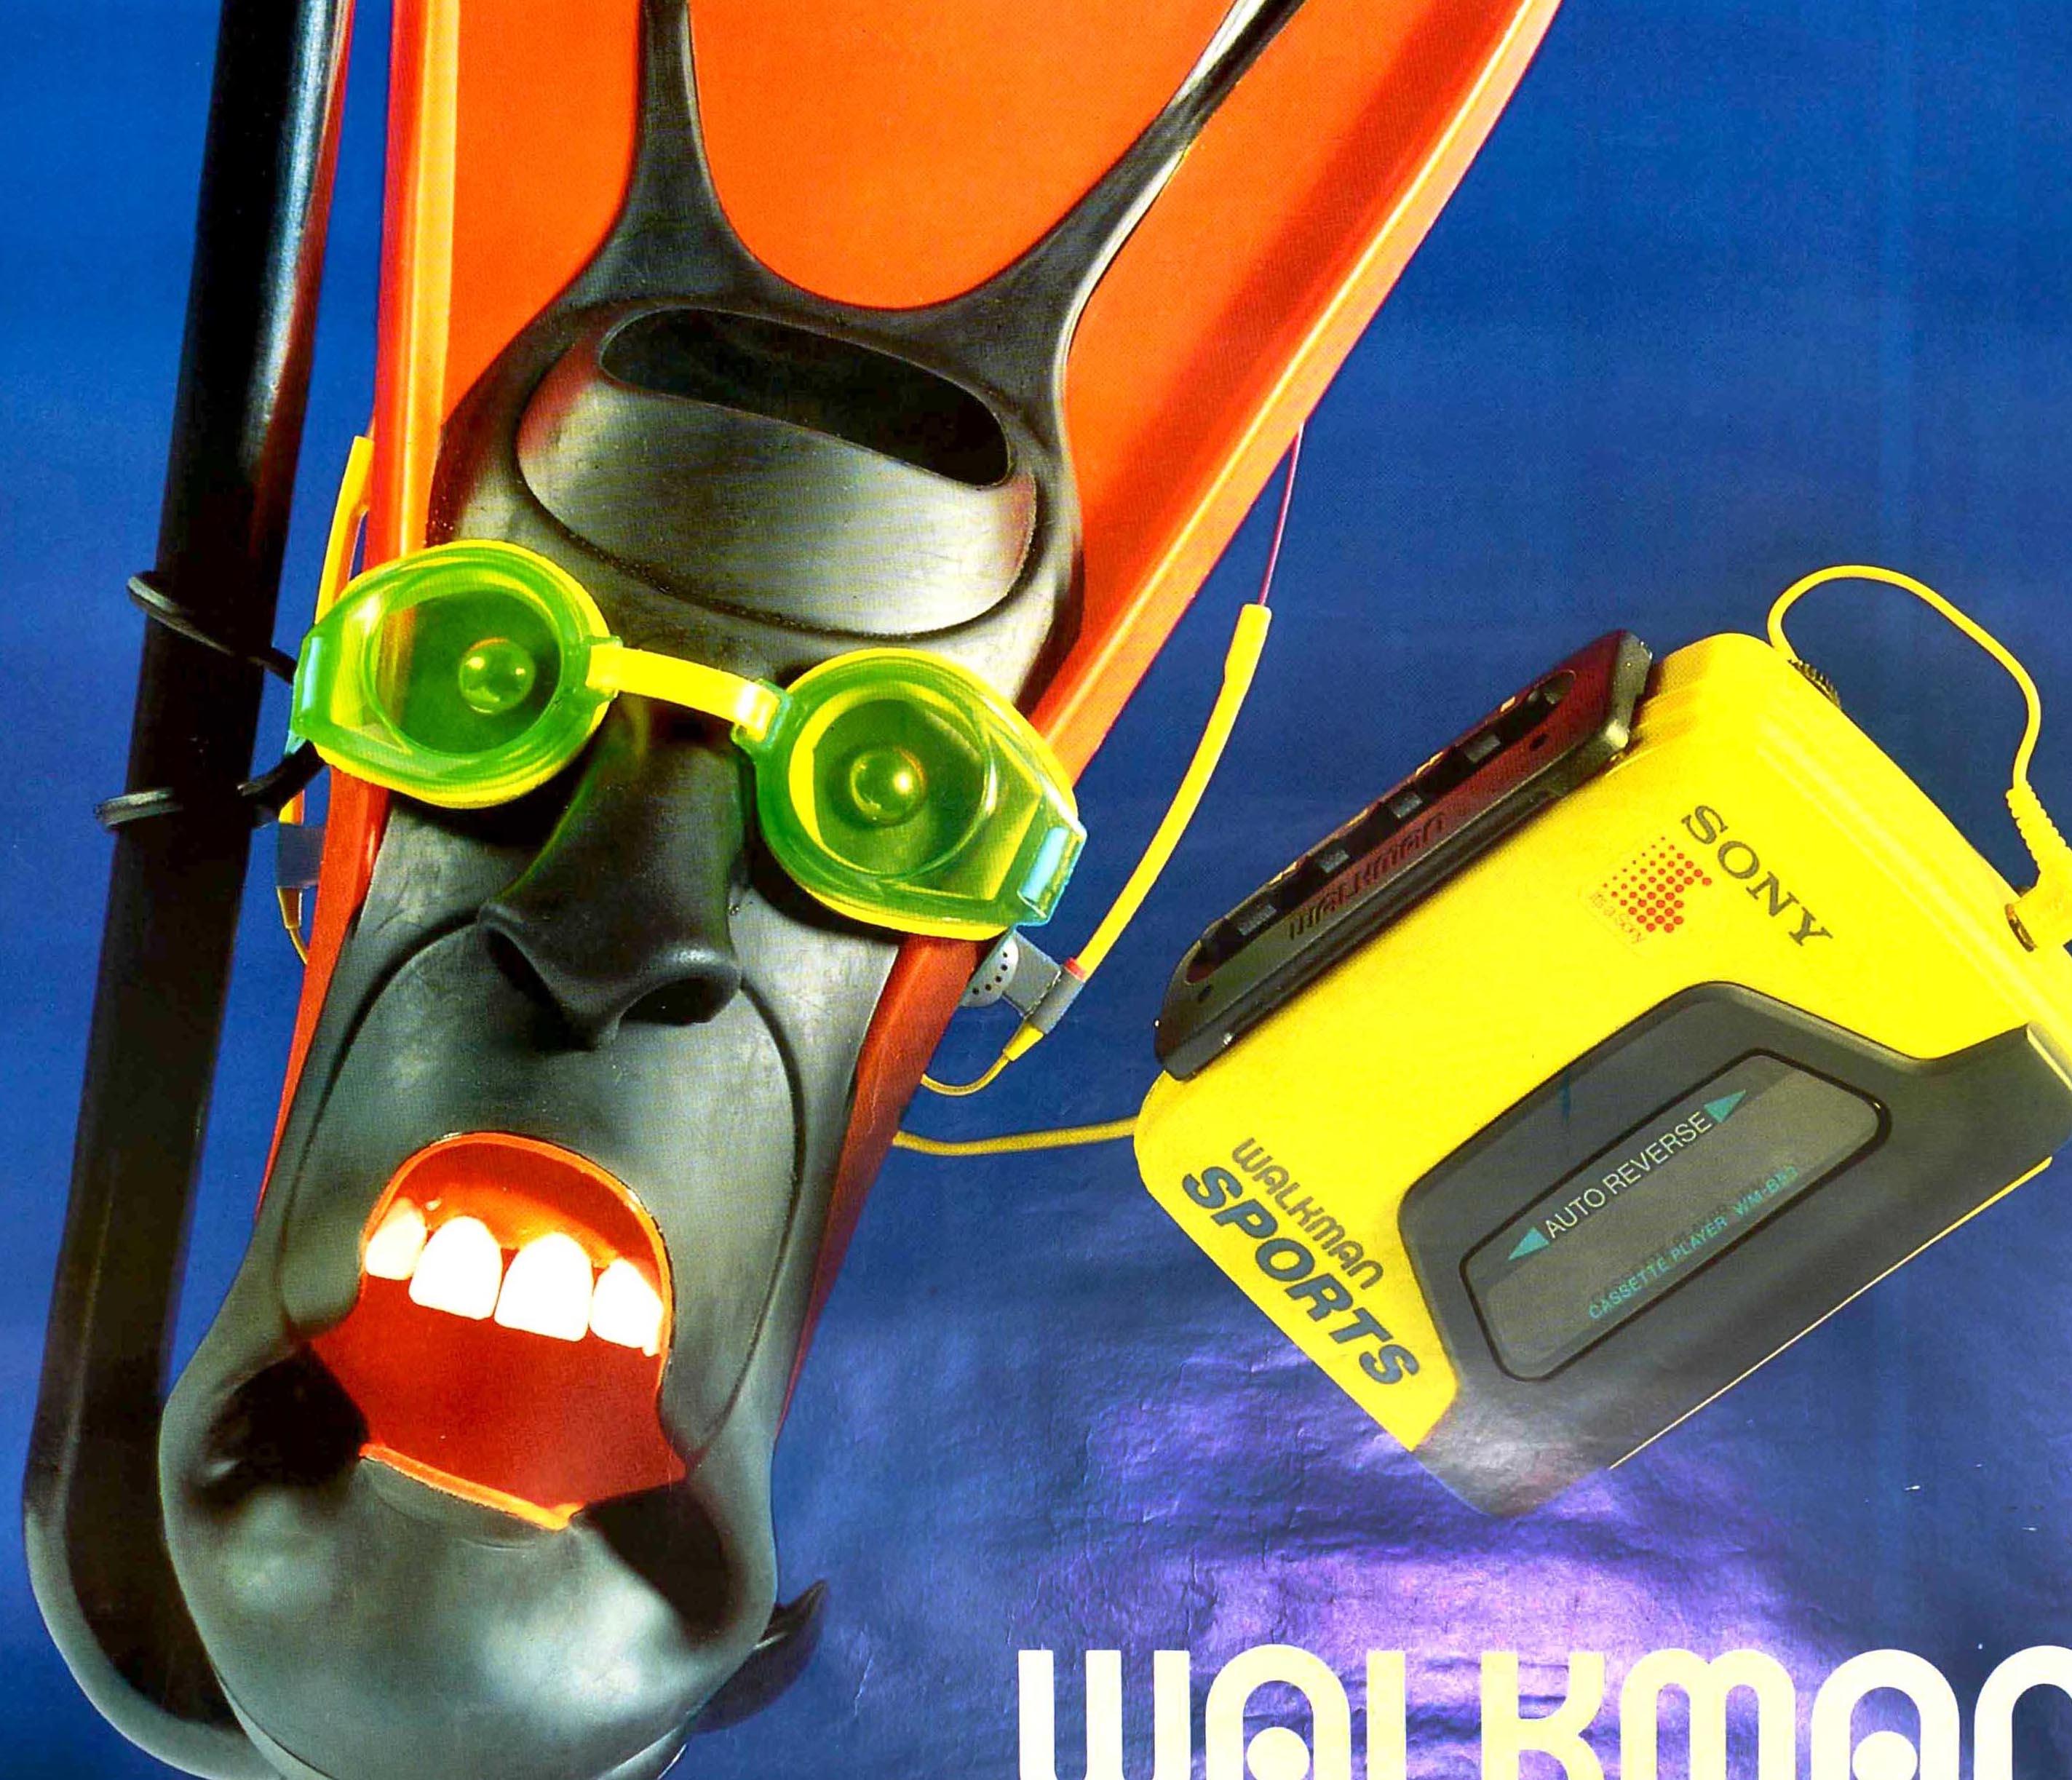 Original vintage advertising poster for Sony Walkman Sports cassette player featuring a fun design depicting a swimming image of an orange and black flipper / fin wearing goggles with the foot forming the shape of a face listening to music with